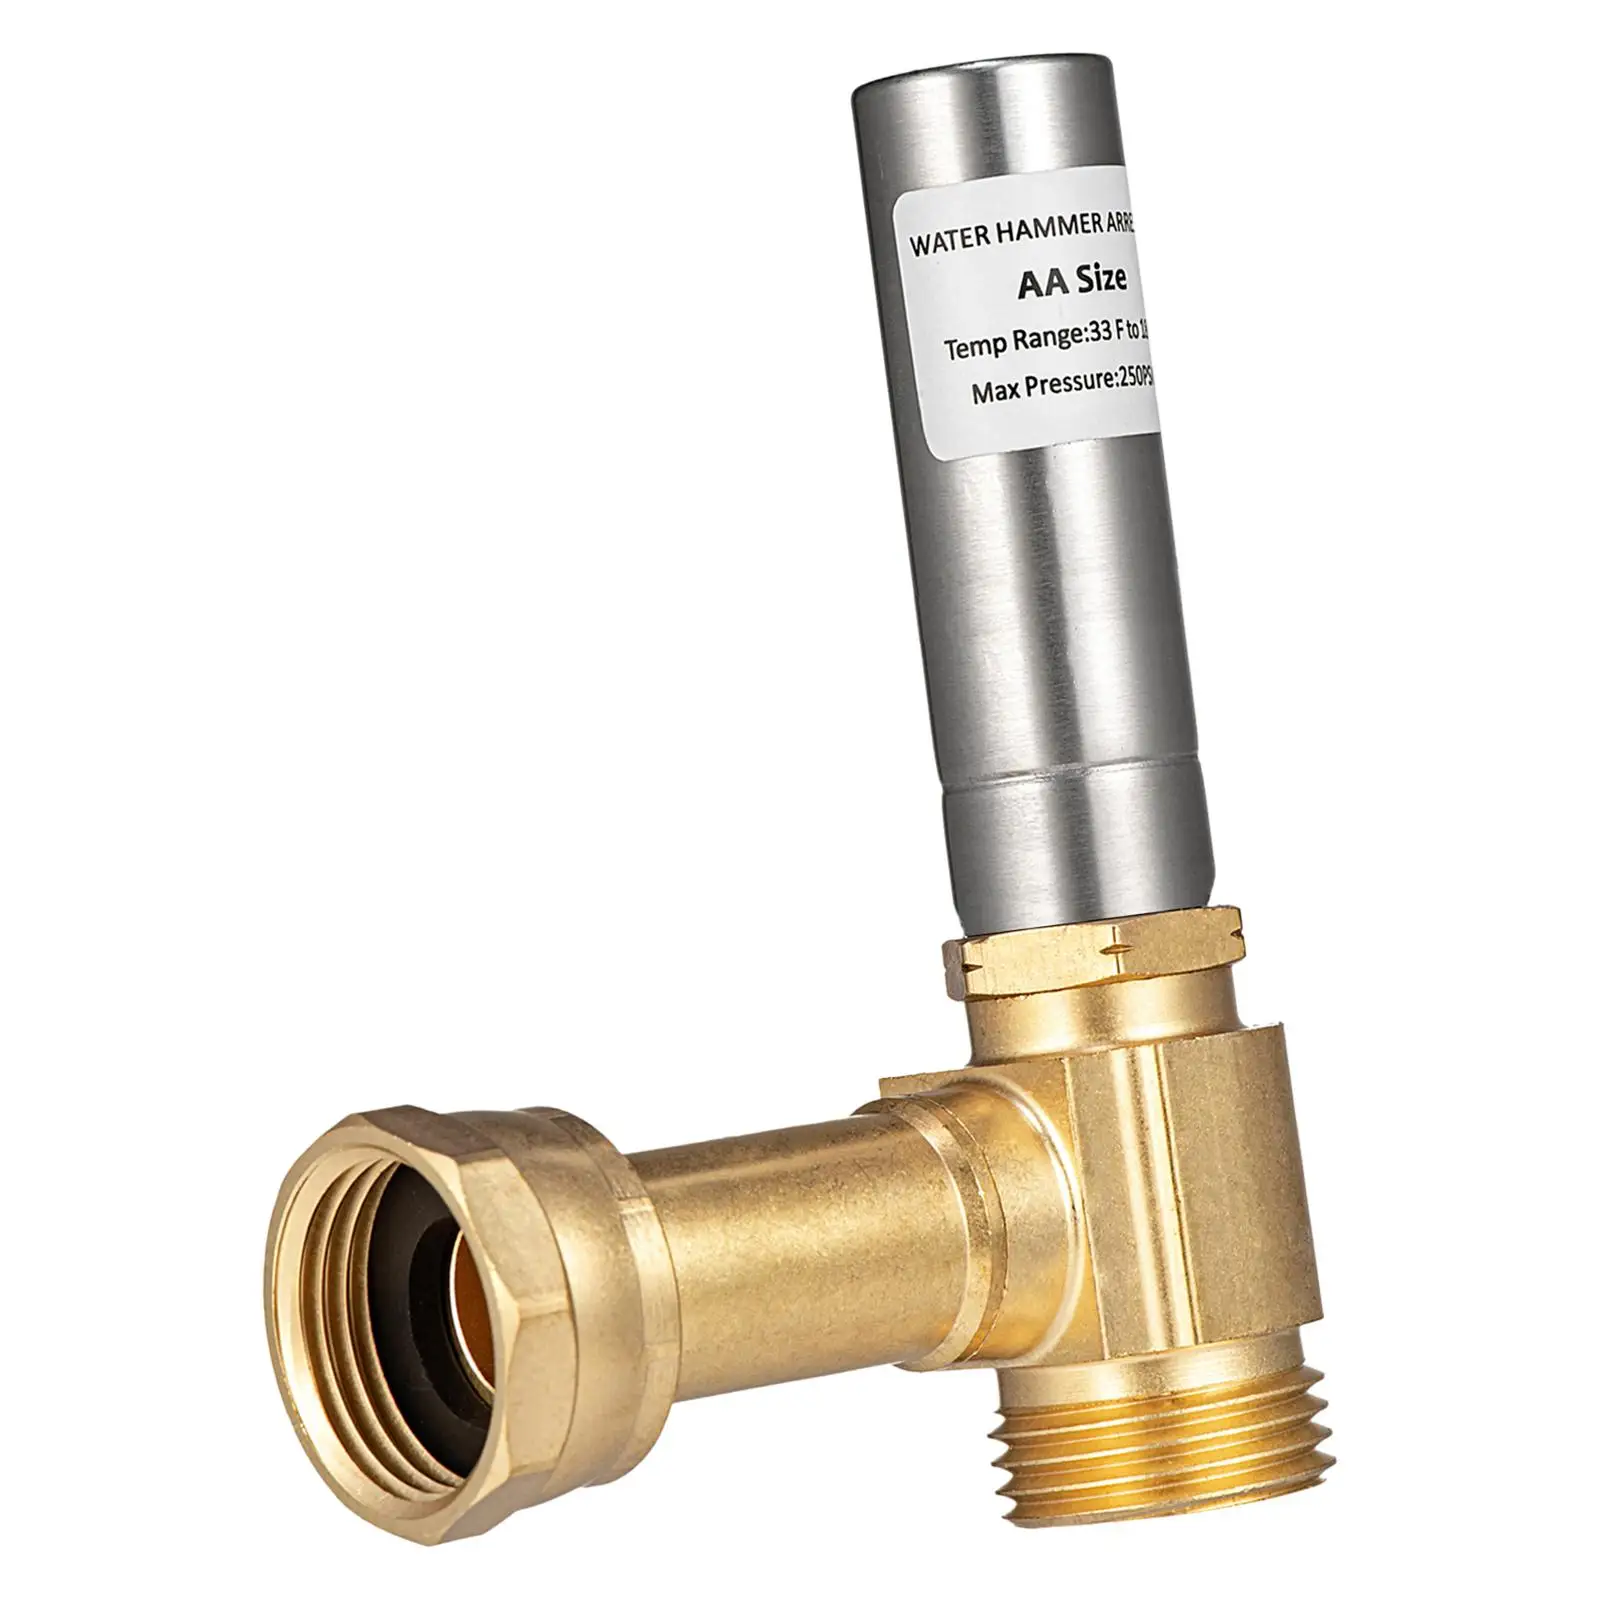 

Water Hammer Arrestor 3/4 inch Thread Pressure Reducer Brass Plumbing Fittings for Washing Machine, Laundry Pipe